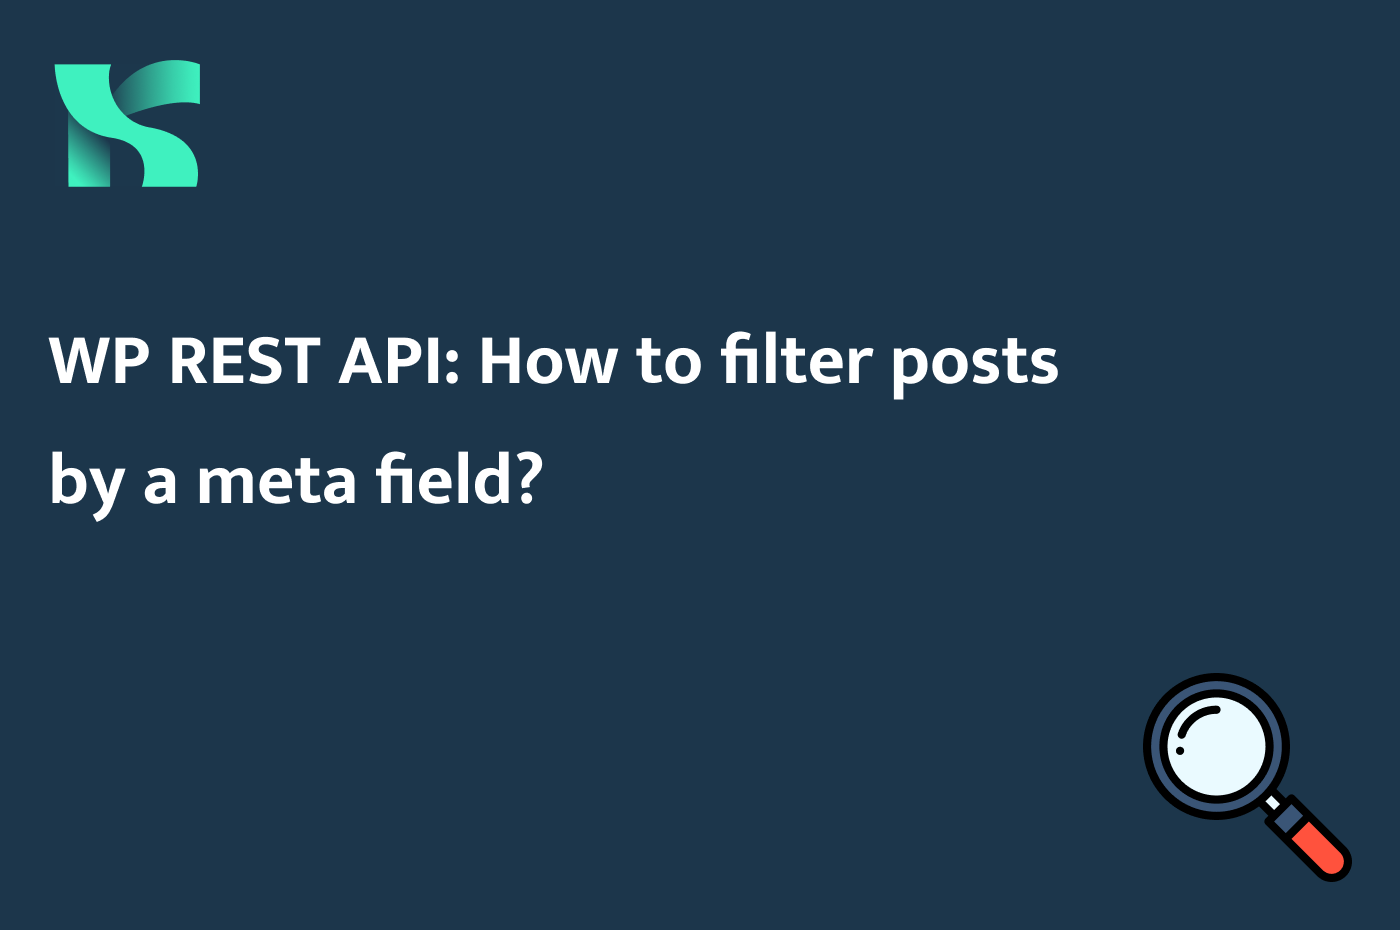 WP REST API: How to filter posts by a meta field?